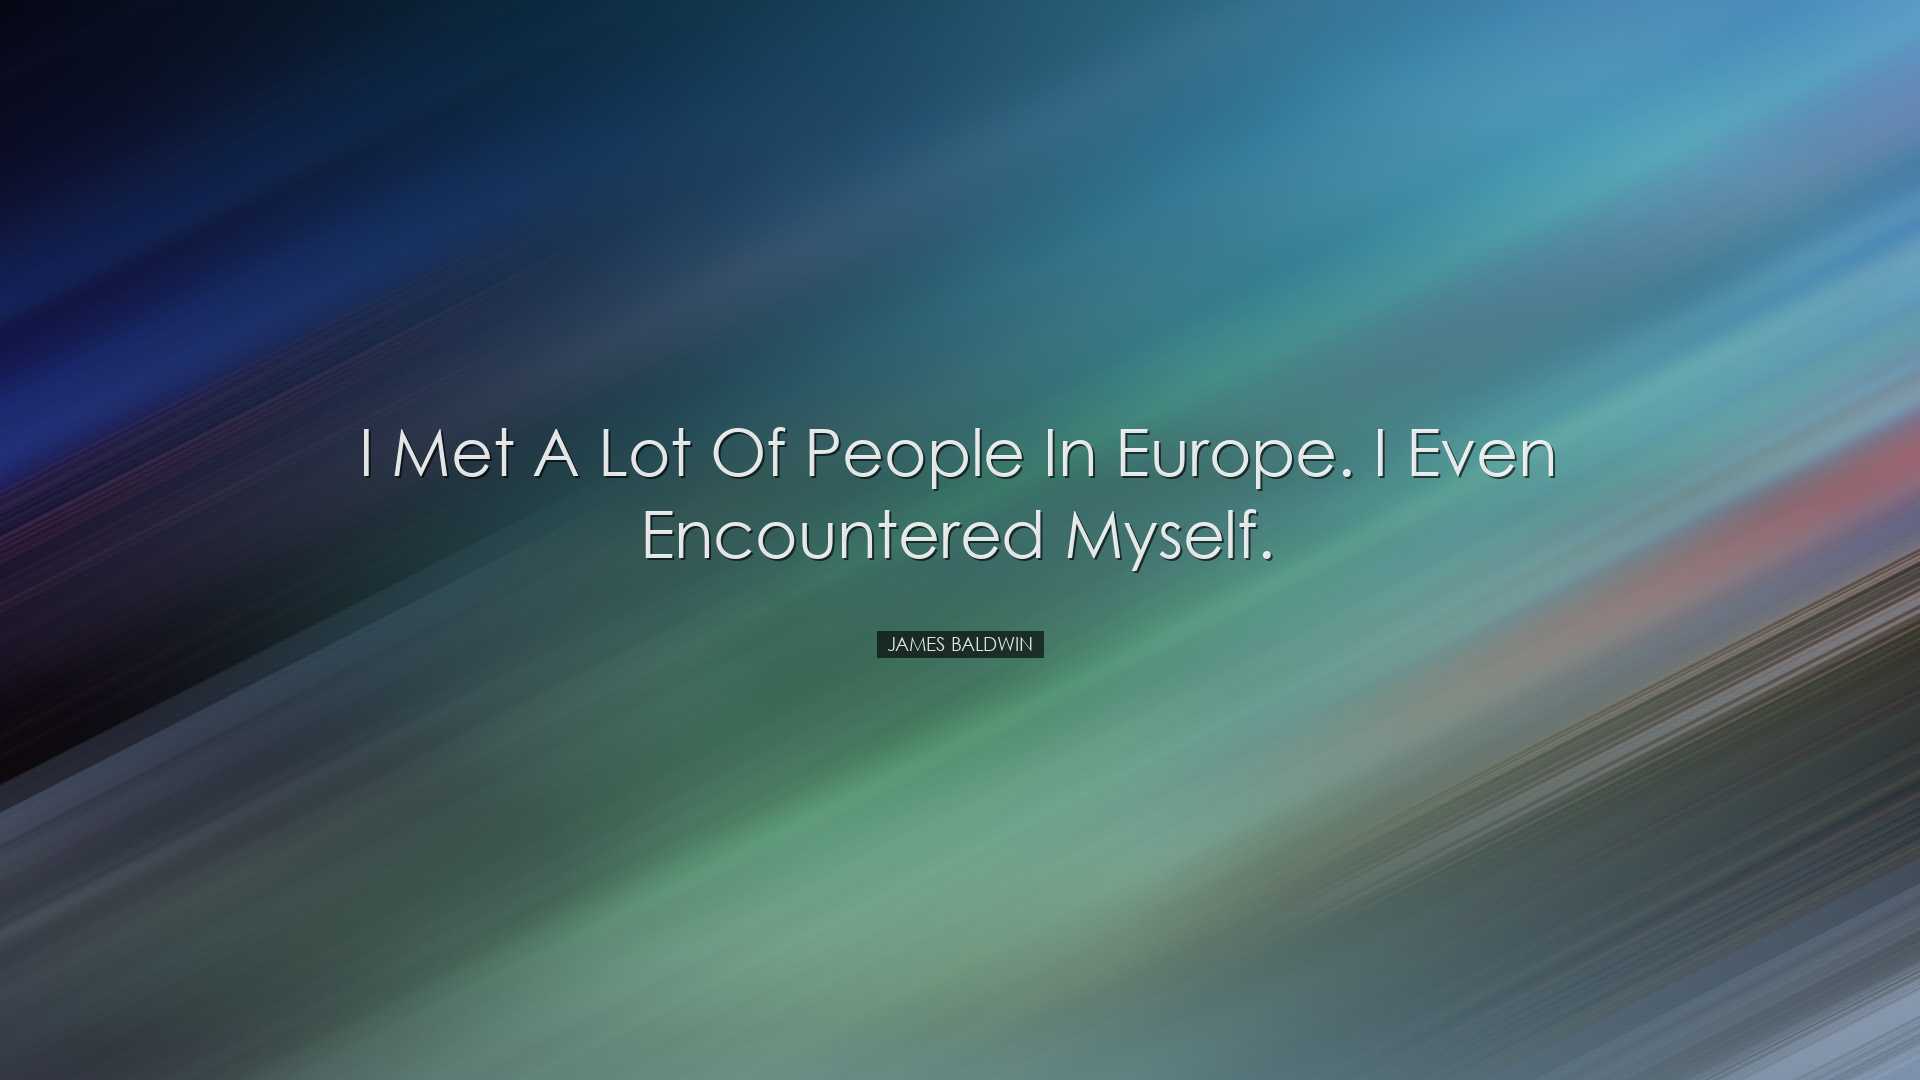 I met a lot of people in Europe. I even encountered myself. - Jame